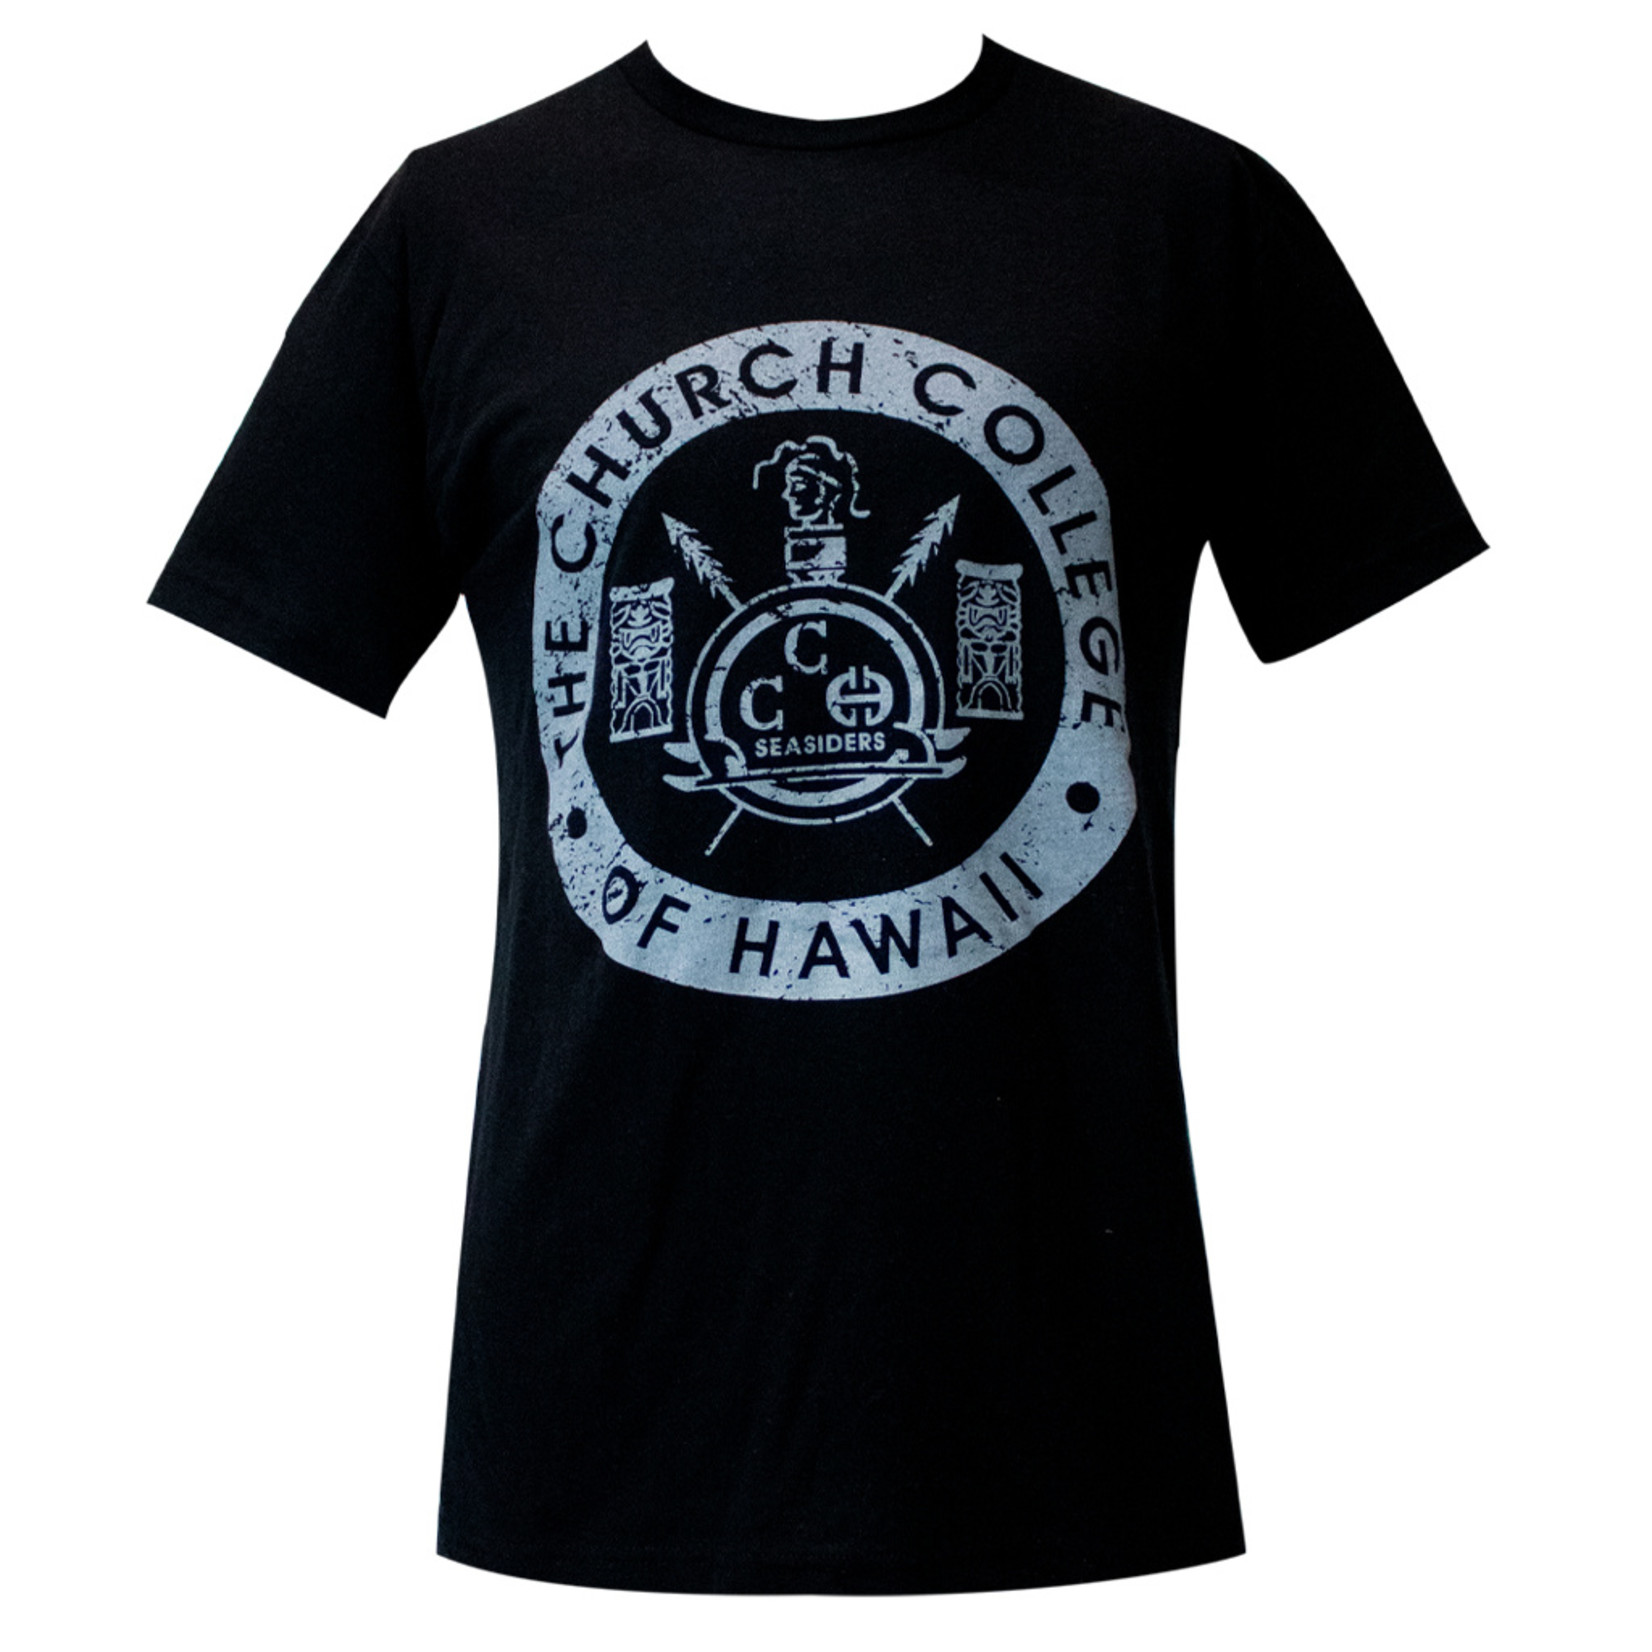 CCH Church College of Hawaii Tee